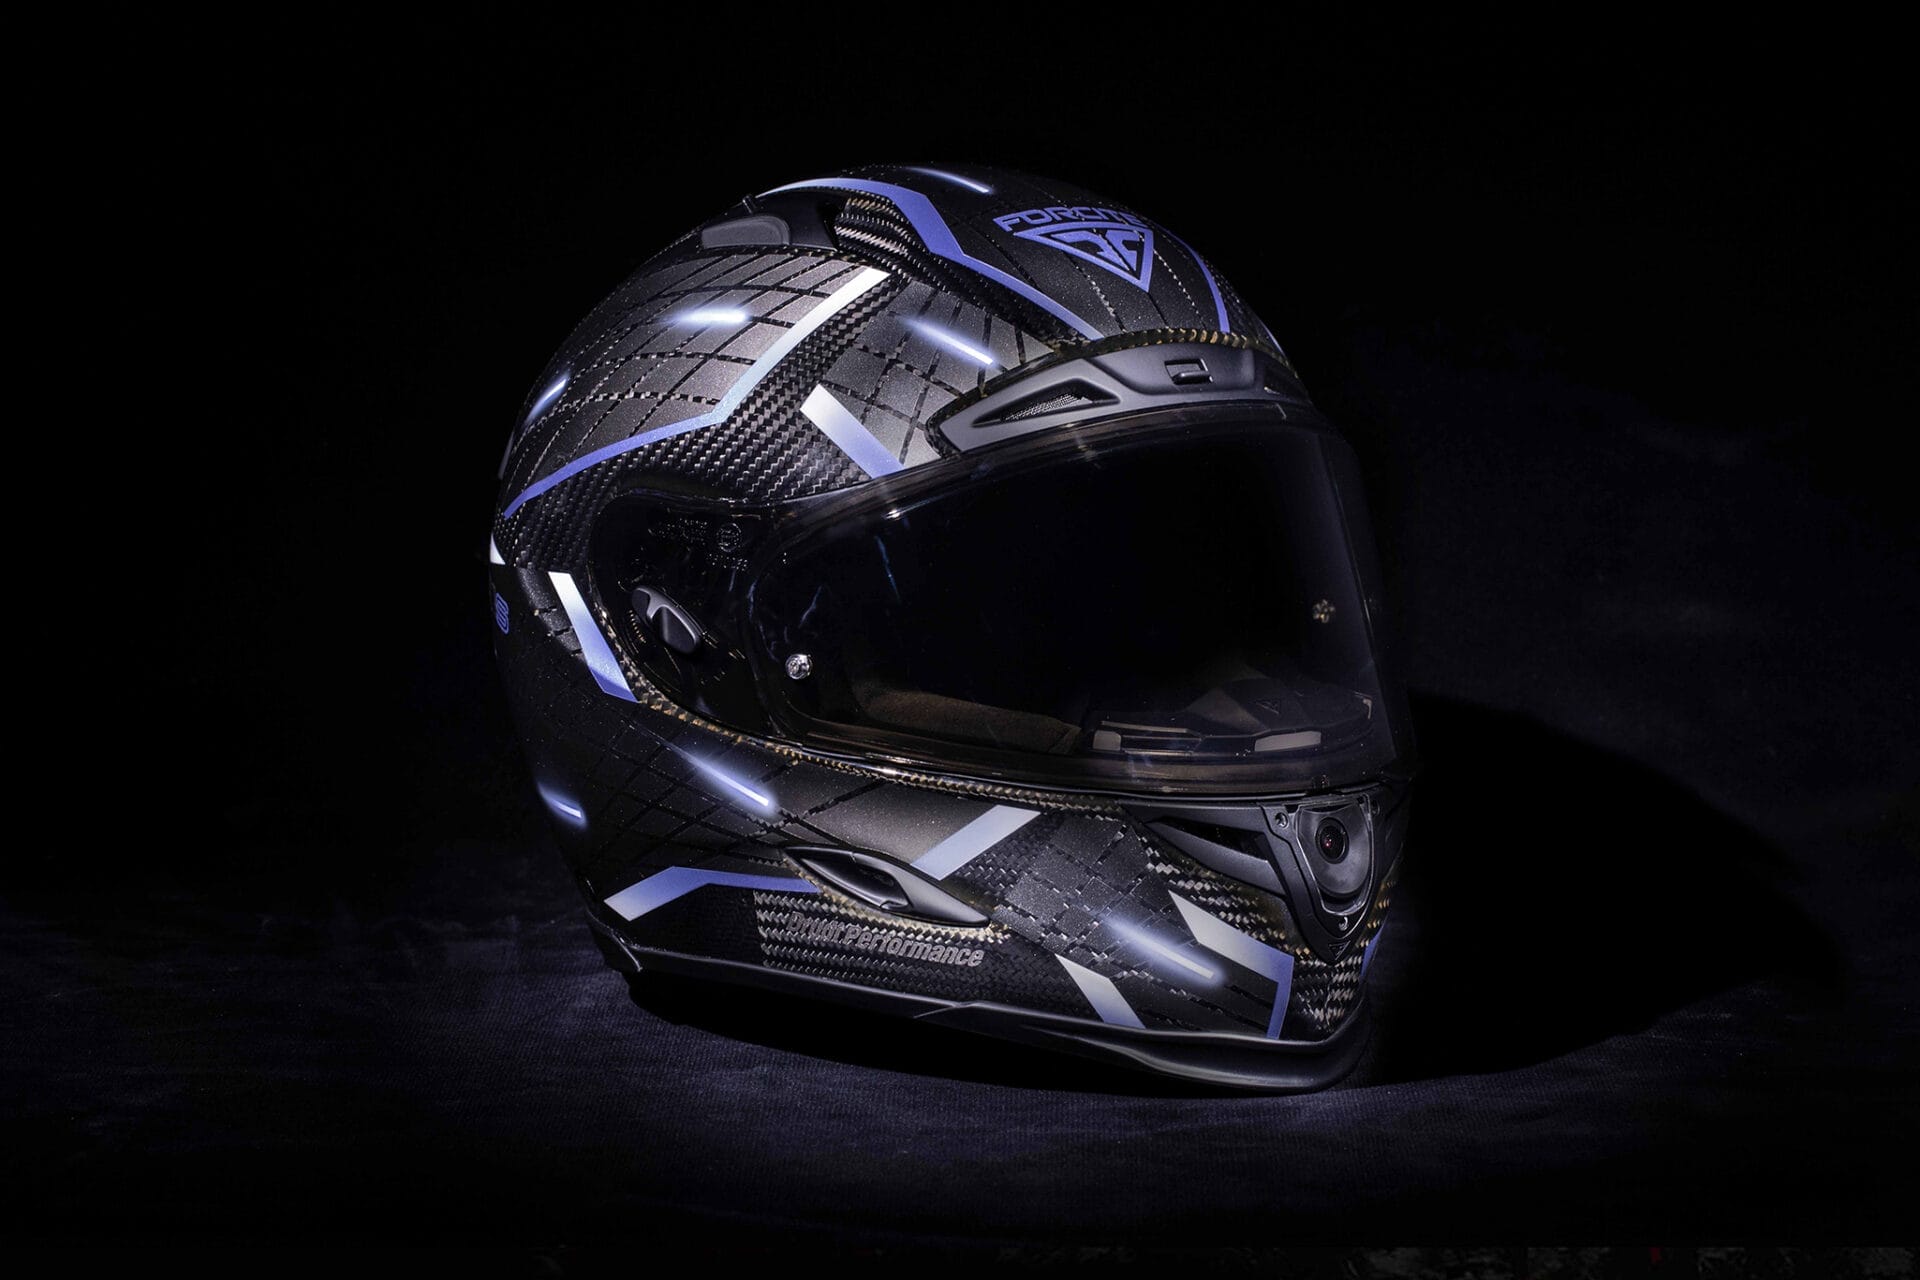 Motorcycle helmet from GoPro – acquisition of Forcite Helmet Systems